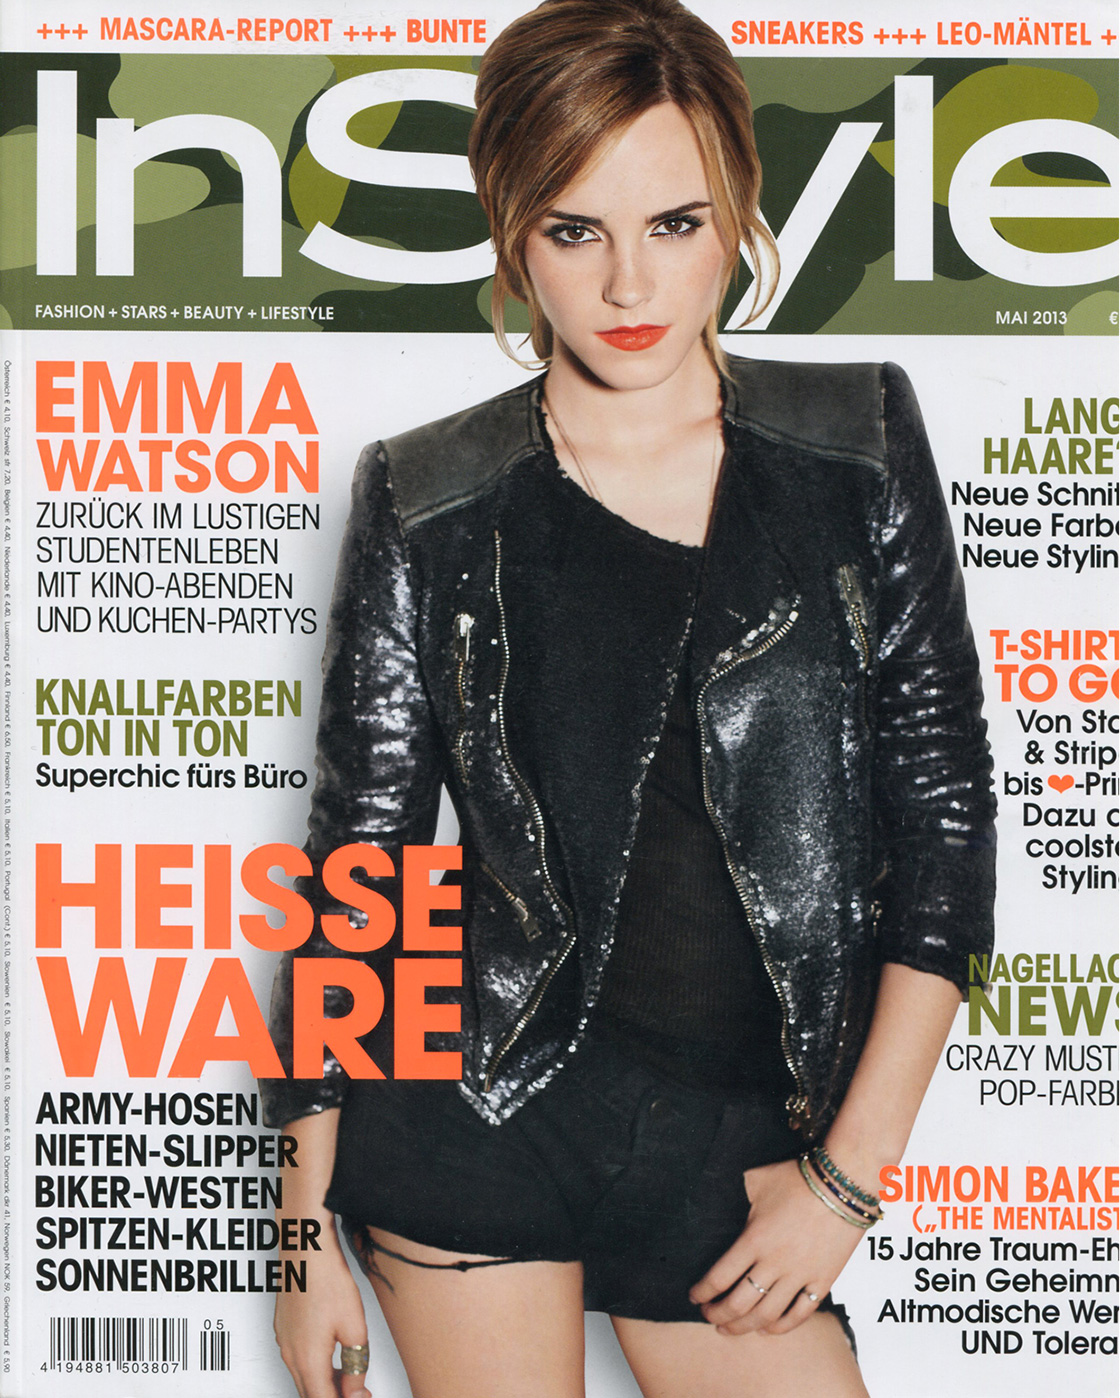 Instyle – May 2013